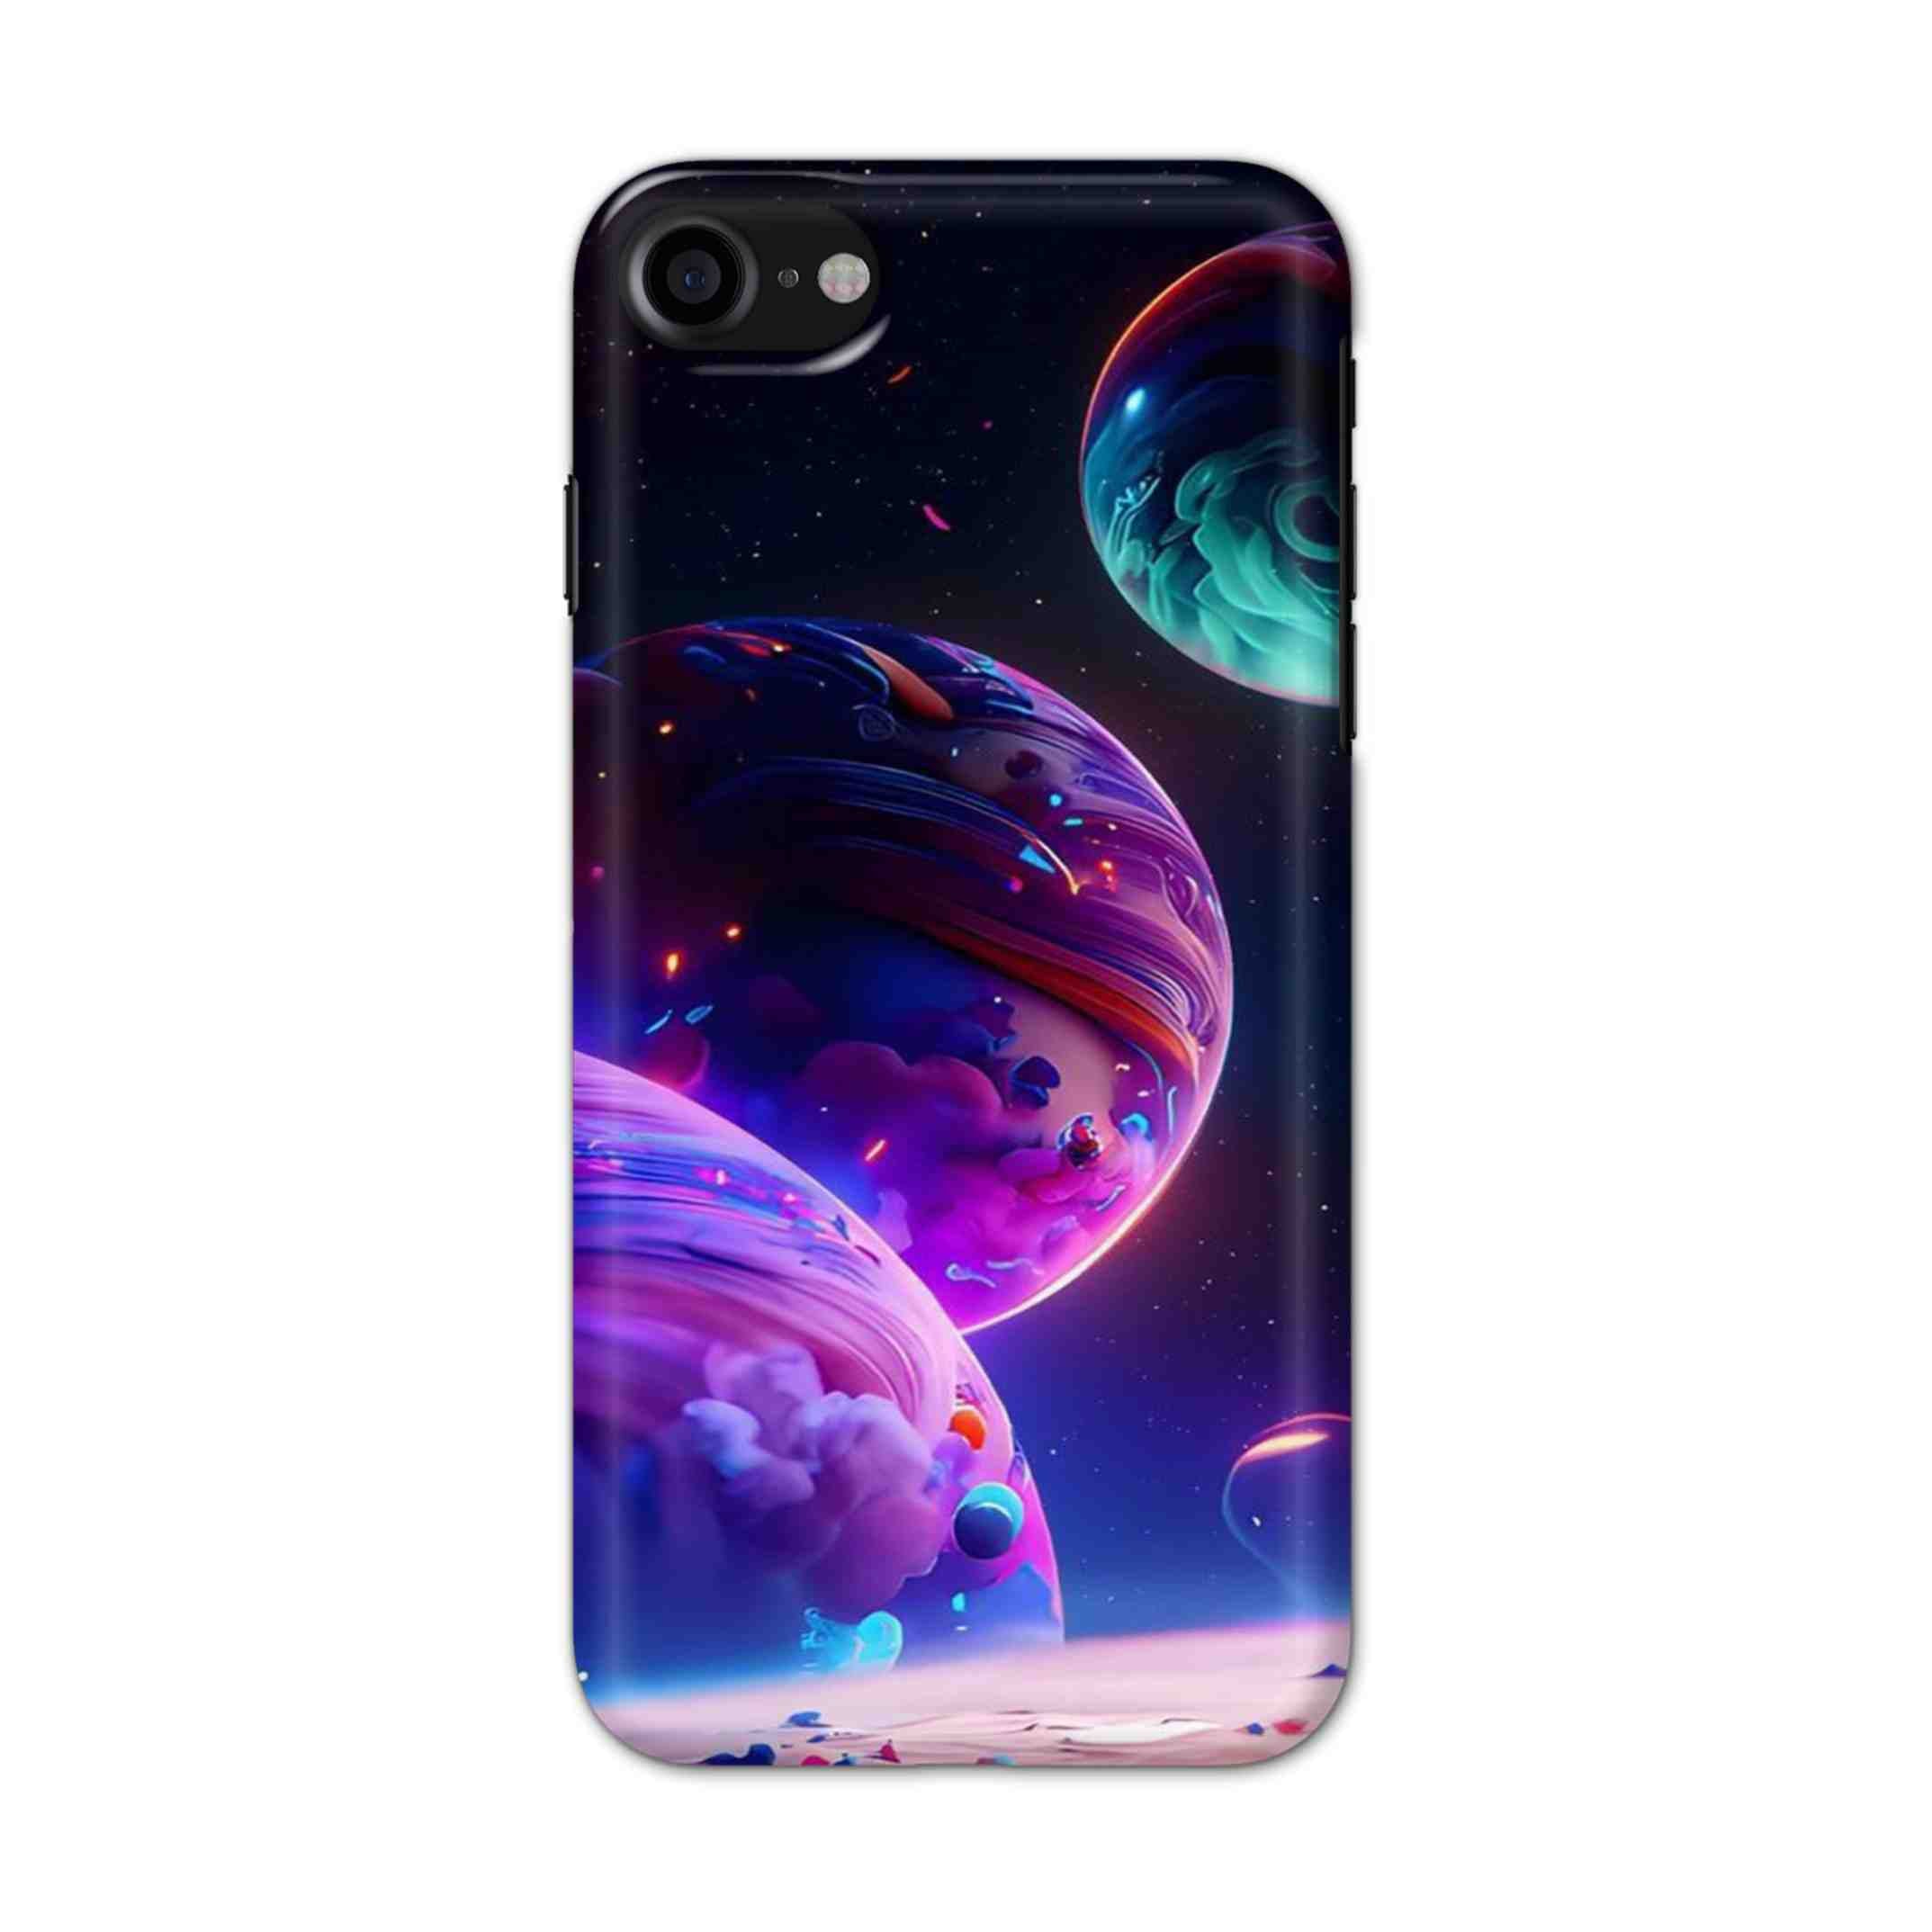 Buy 3 Earth Hard Back Mobile Phone Case/Cover For iPhone 7 / 8 Online